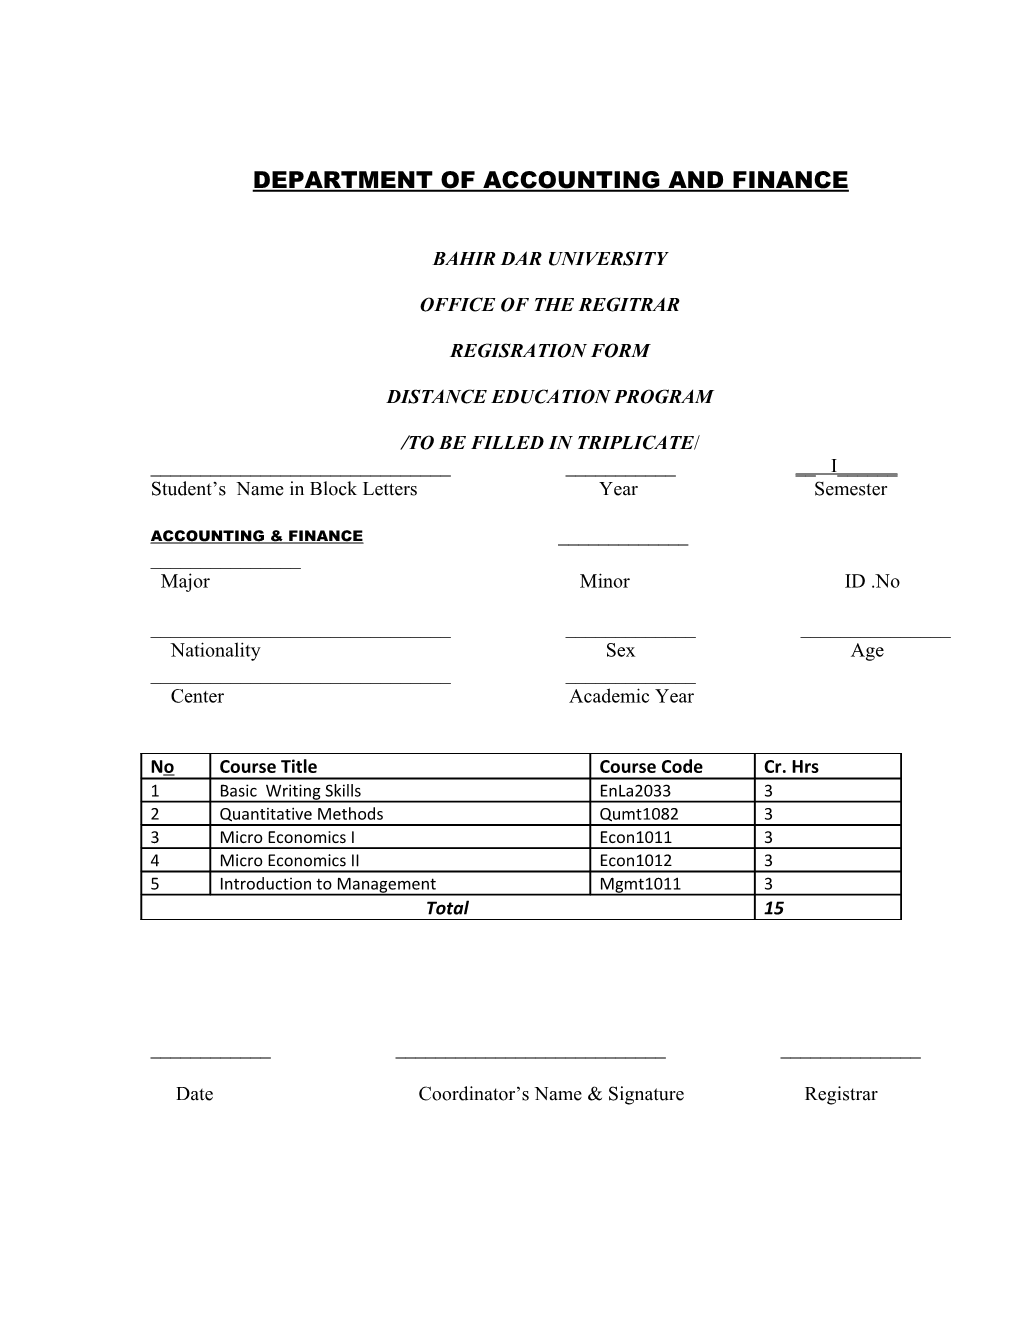 Department of Accounting and Finance